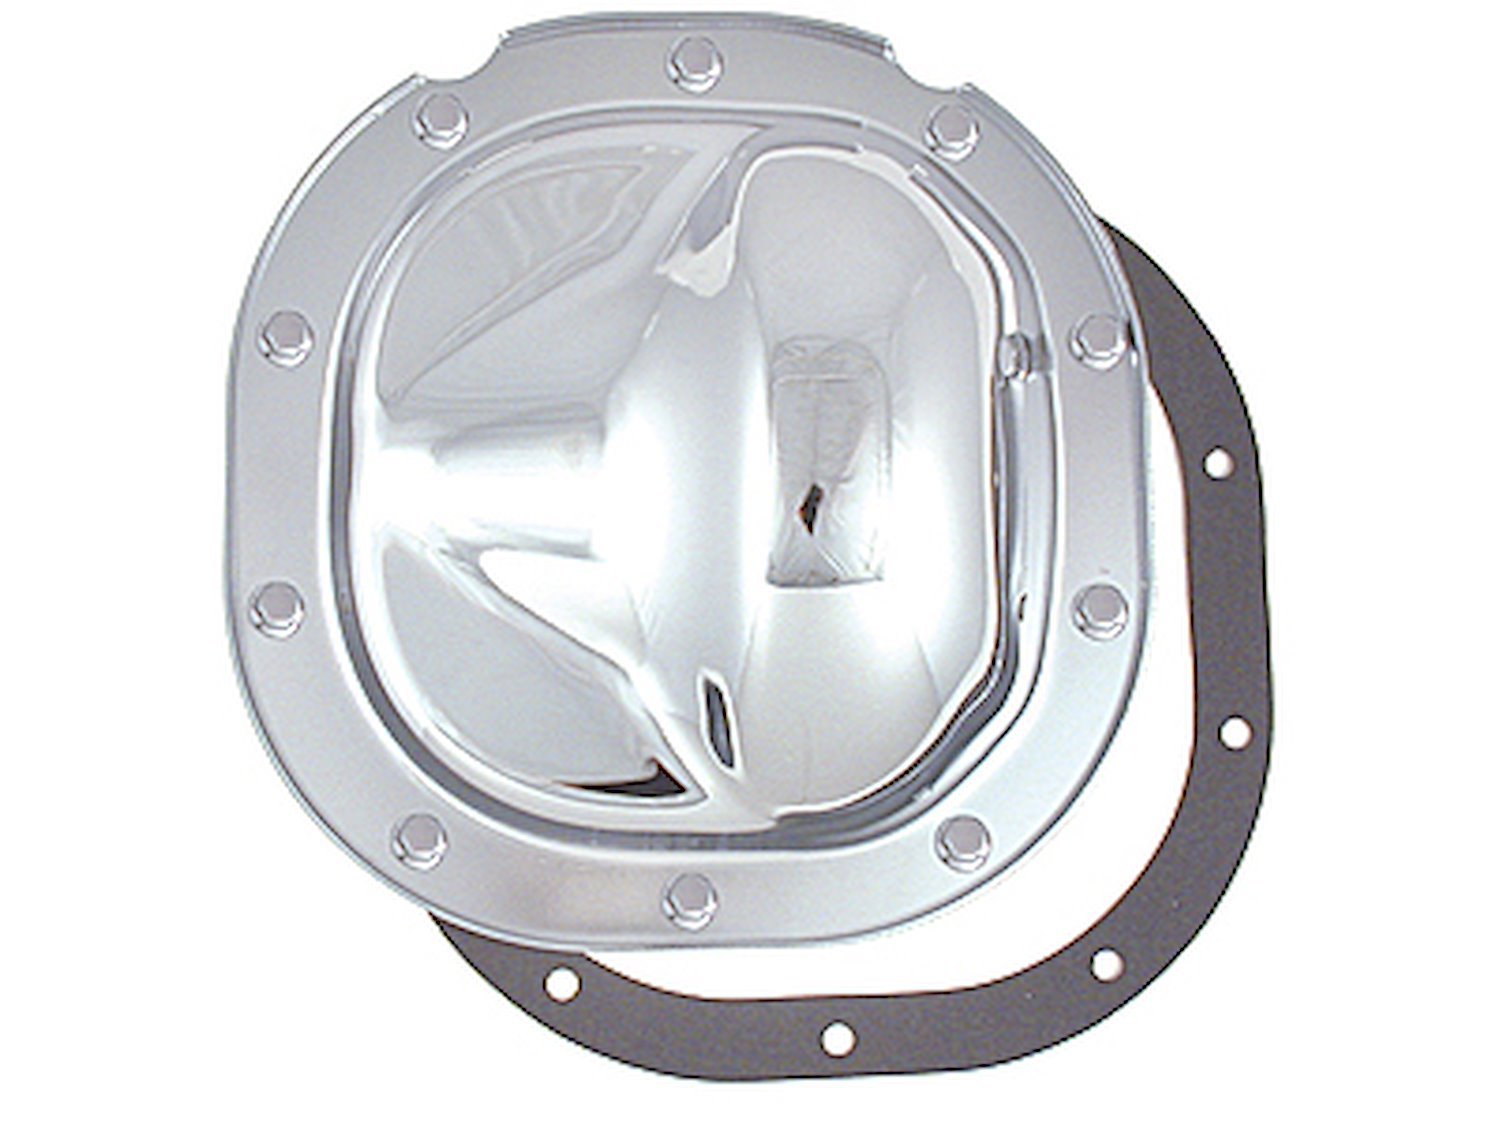 Ford explorer 8.8 differential cover #8